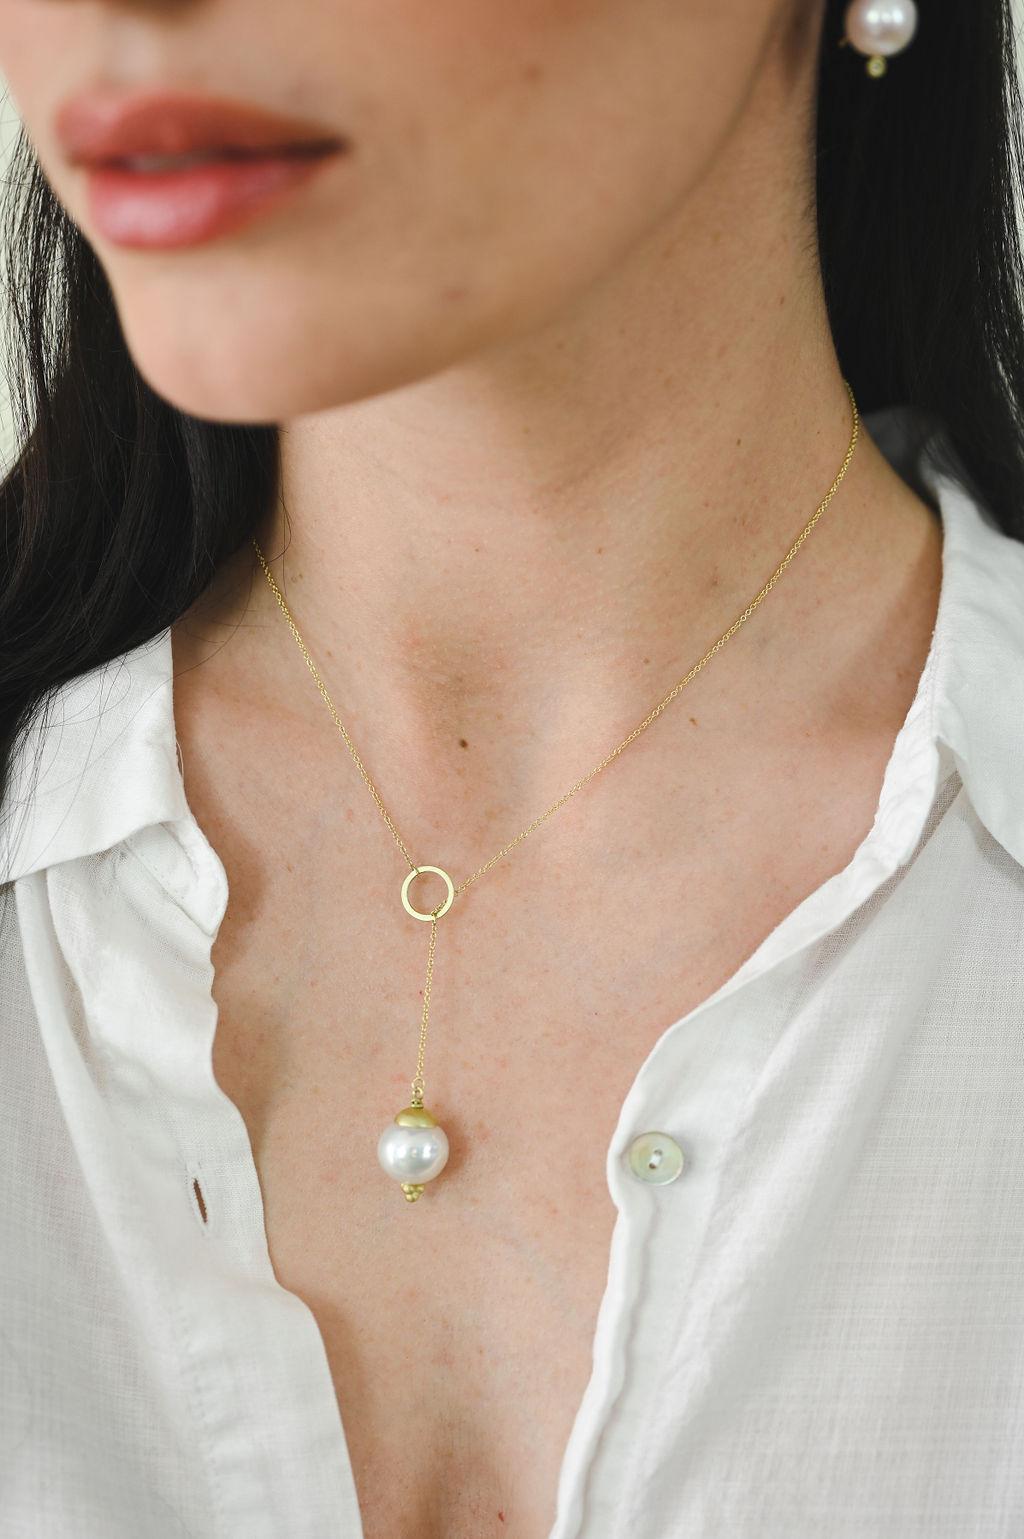 Faye Kim's 18 Karat Gold custom handcrafted White Freshwater Pearl Y Necklace, with its 18 Karat Gold Cap and Gold Triple Granulation tip, offers an effortless, timeless style, perfect for everyday wear or special occasions. Great for layering with